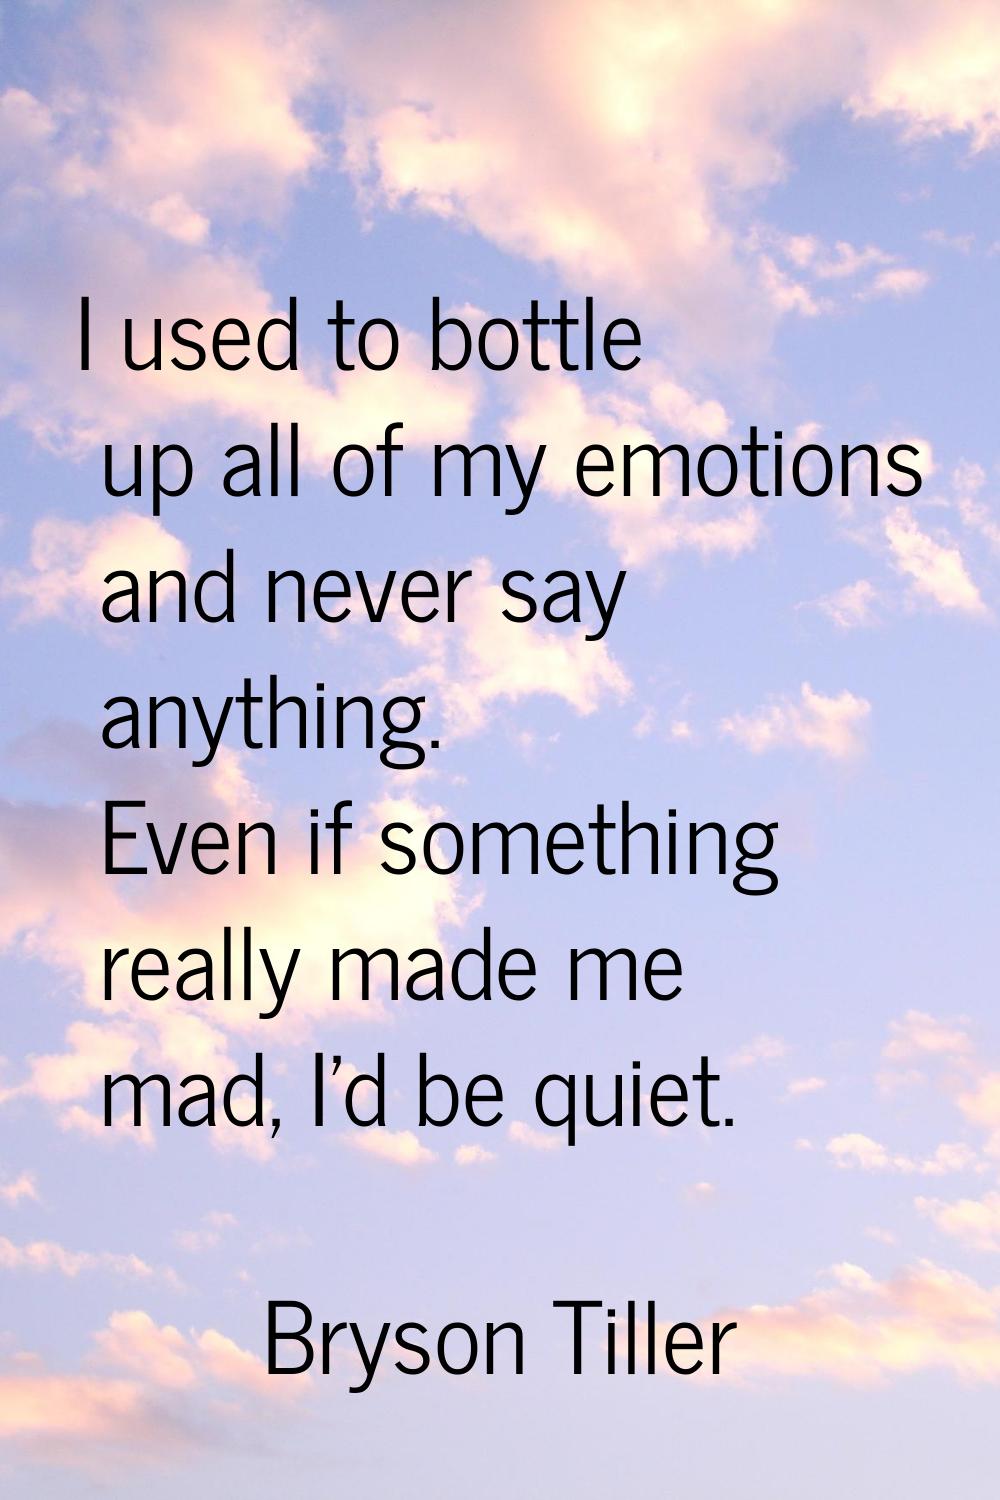 I used to bottle up all of my emotions and never say anything. Even if something really made me mad